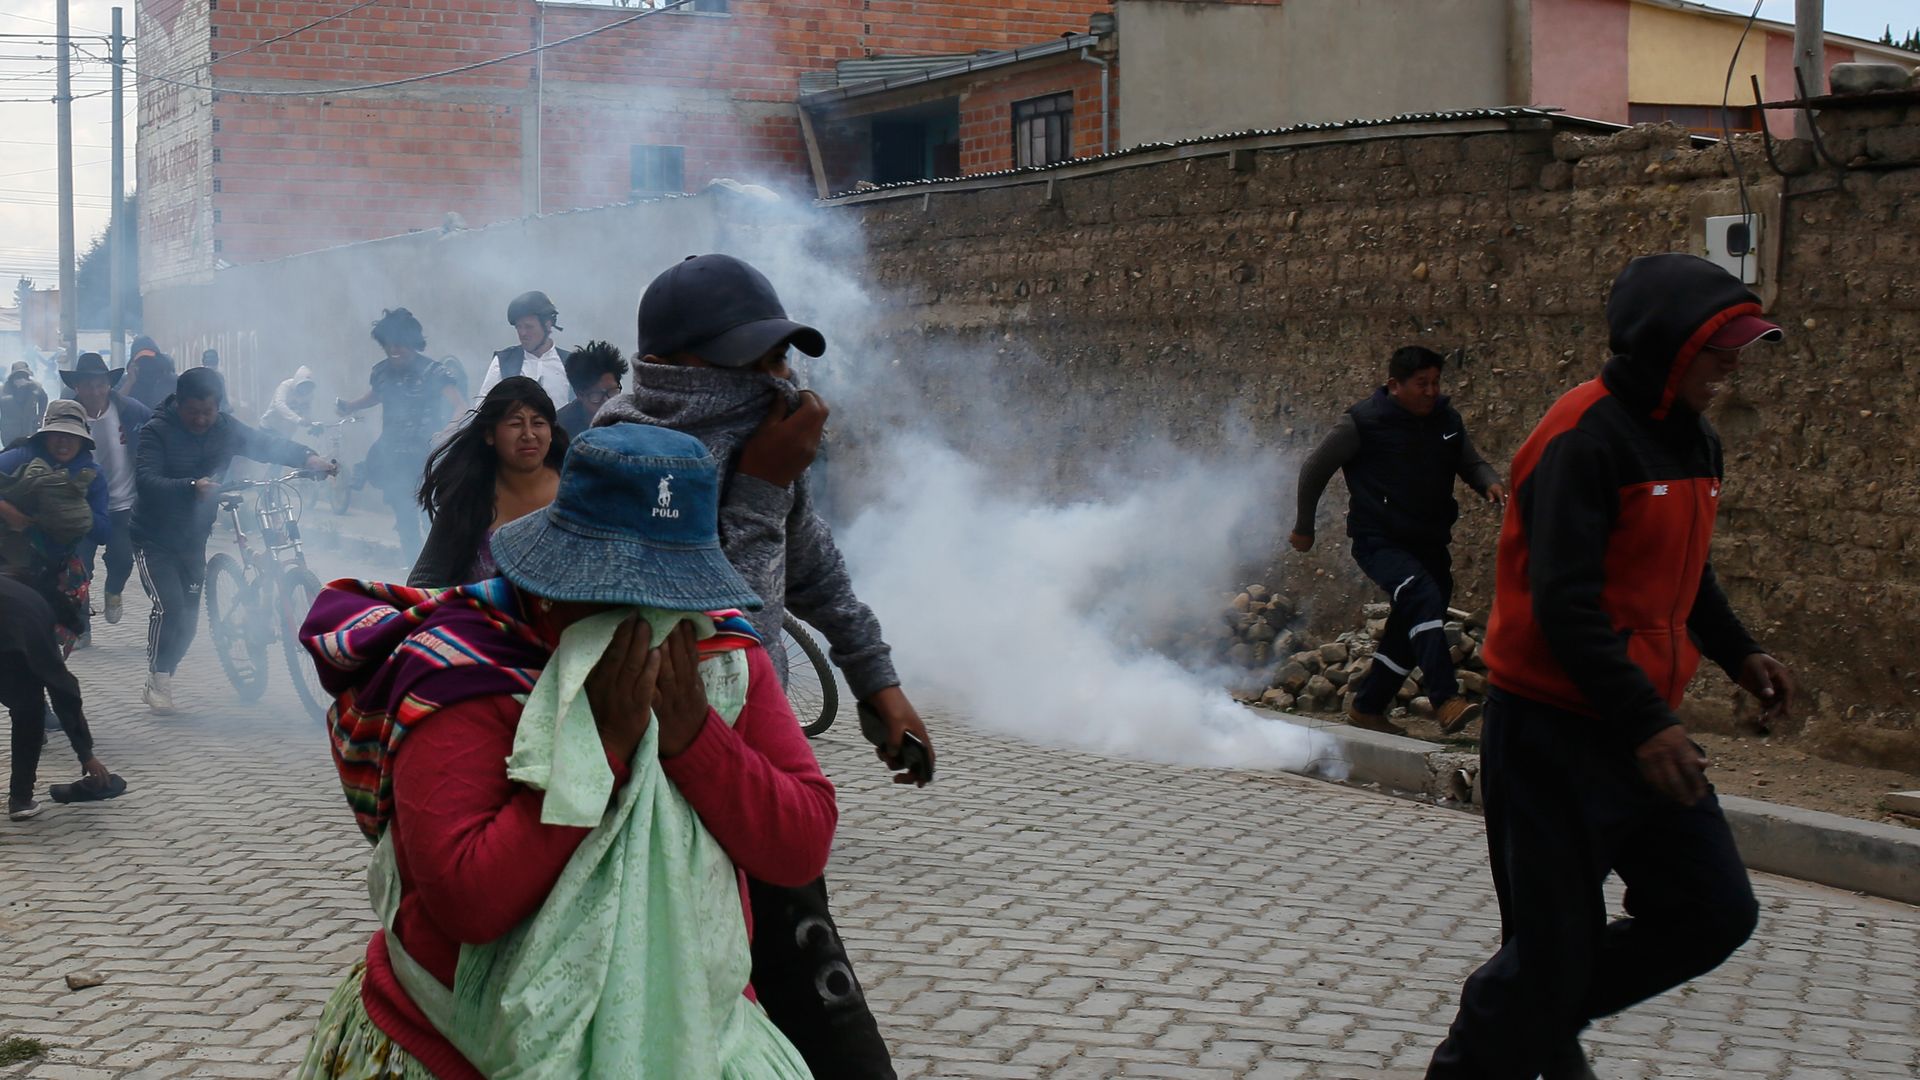 Supporters of Evo Morales run from tear gas as clashing with police during protests on November 19